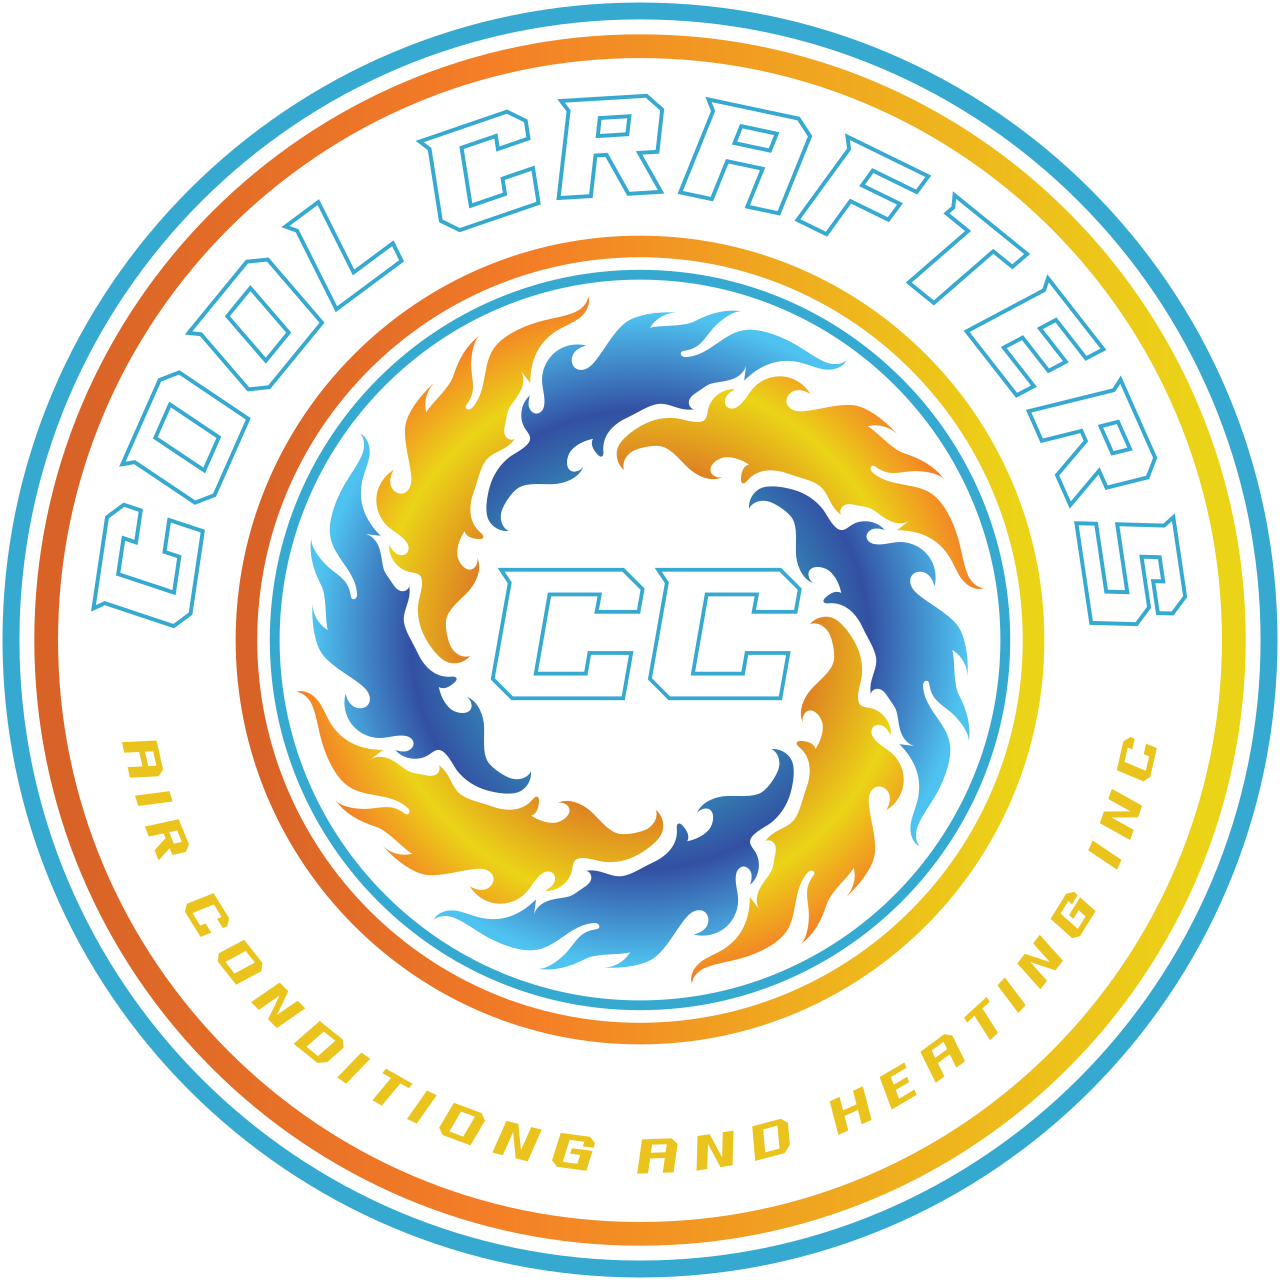 COOL CRAFTERS's logo